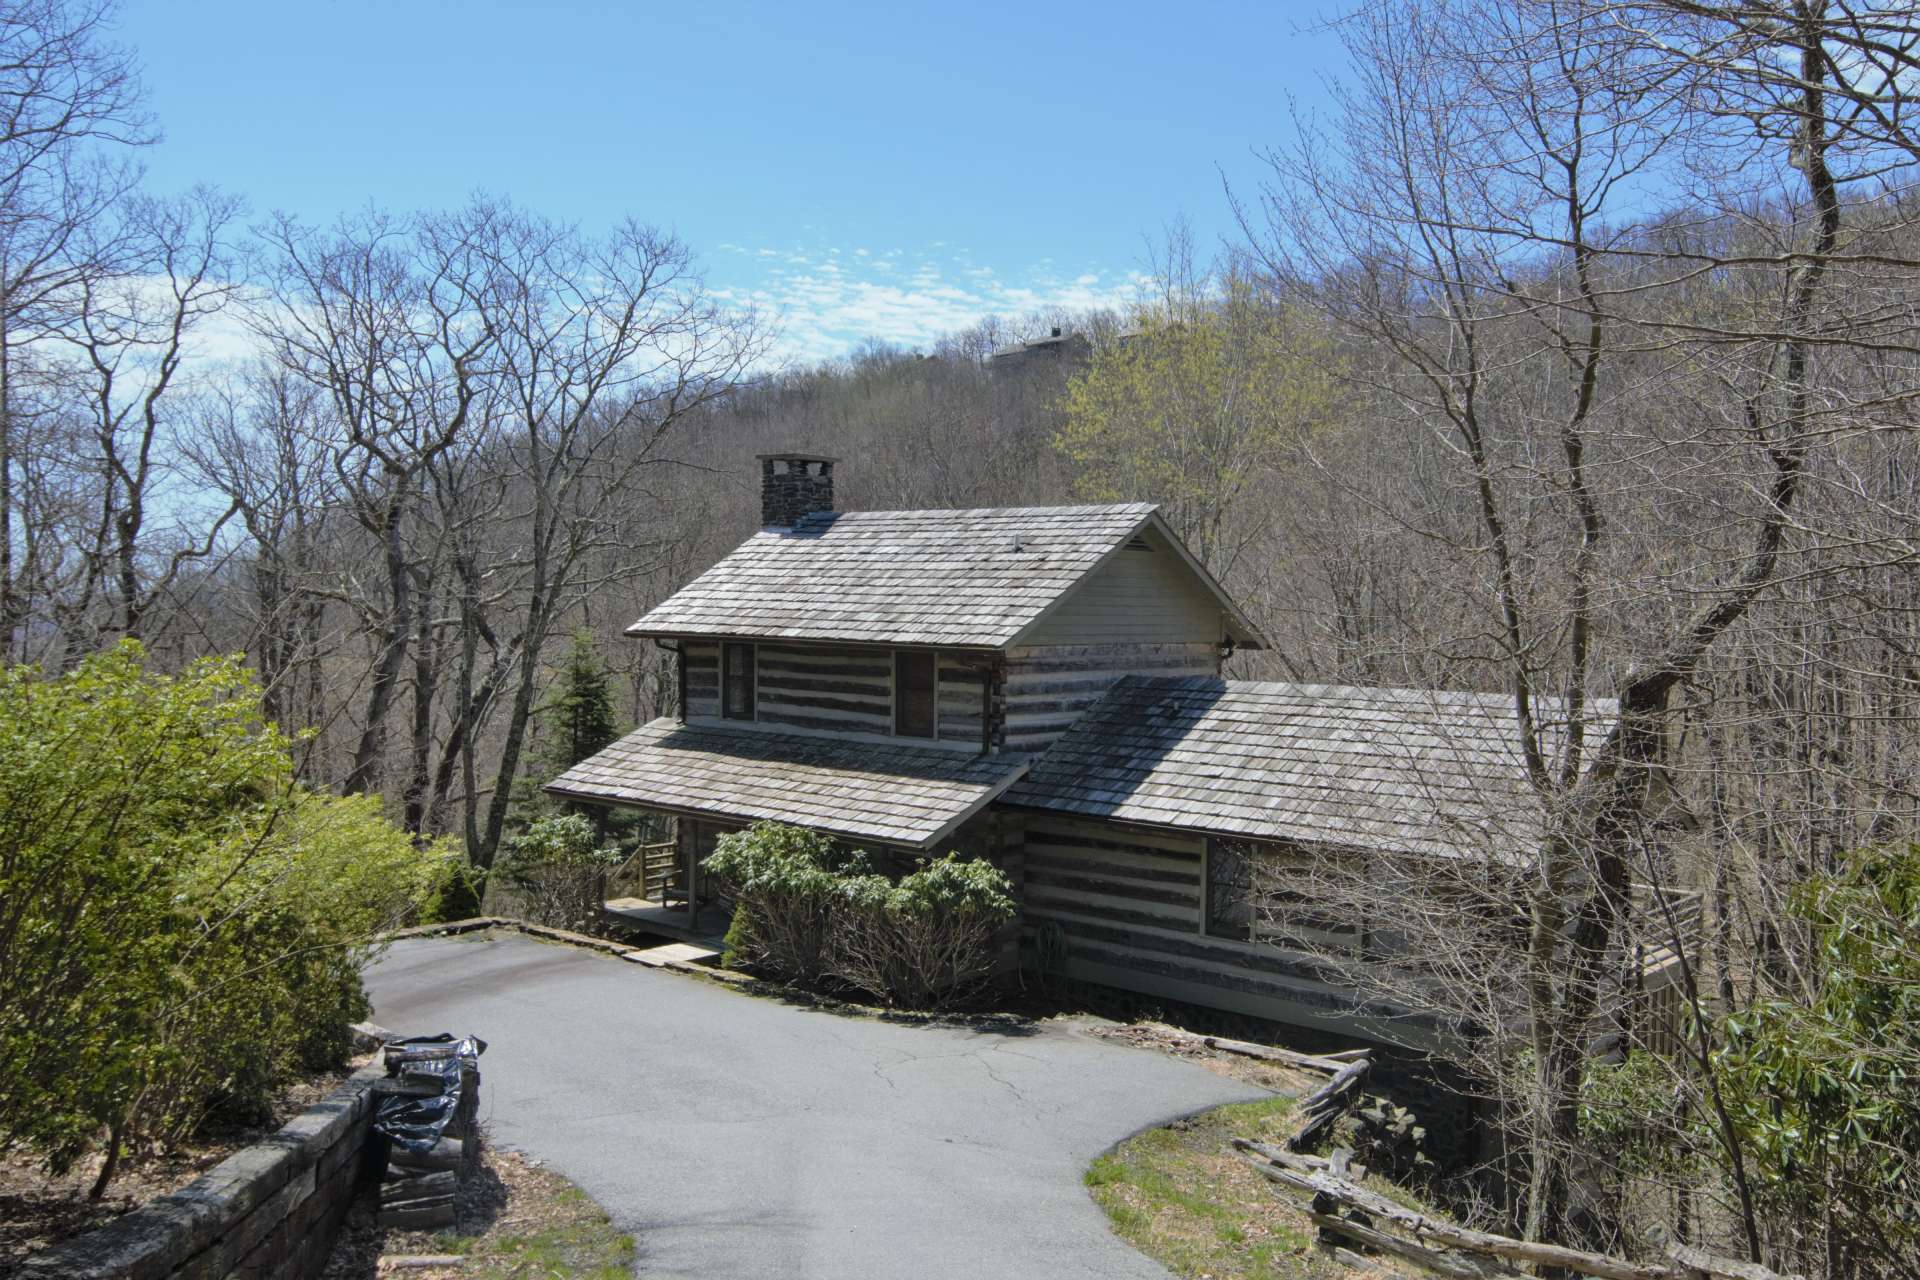 This truly unique and irresistible antique log cabin nestled among a wooded setting with creek in the charming log home community of Stonebridge in the Todd area of Southern Ashe County is offered at $429,000 and perfect for your Blue Ridge Mountain retreat.